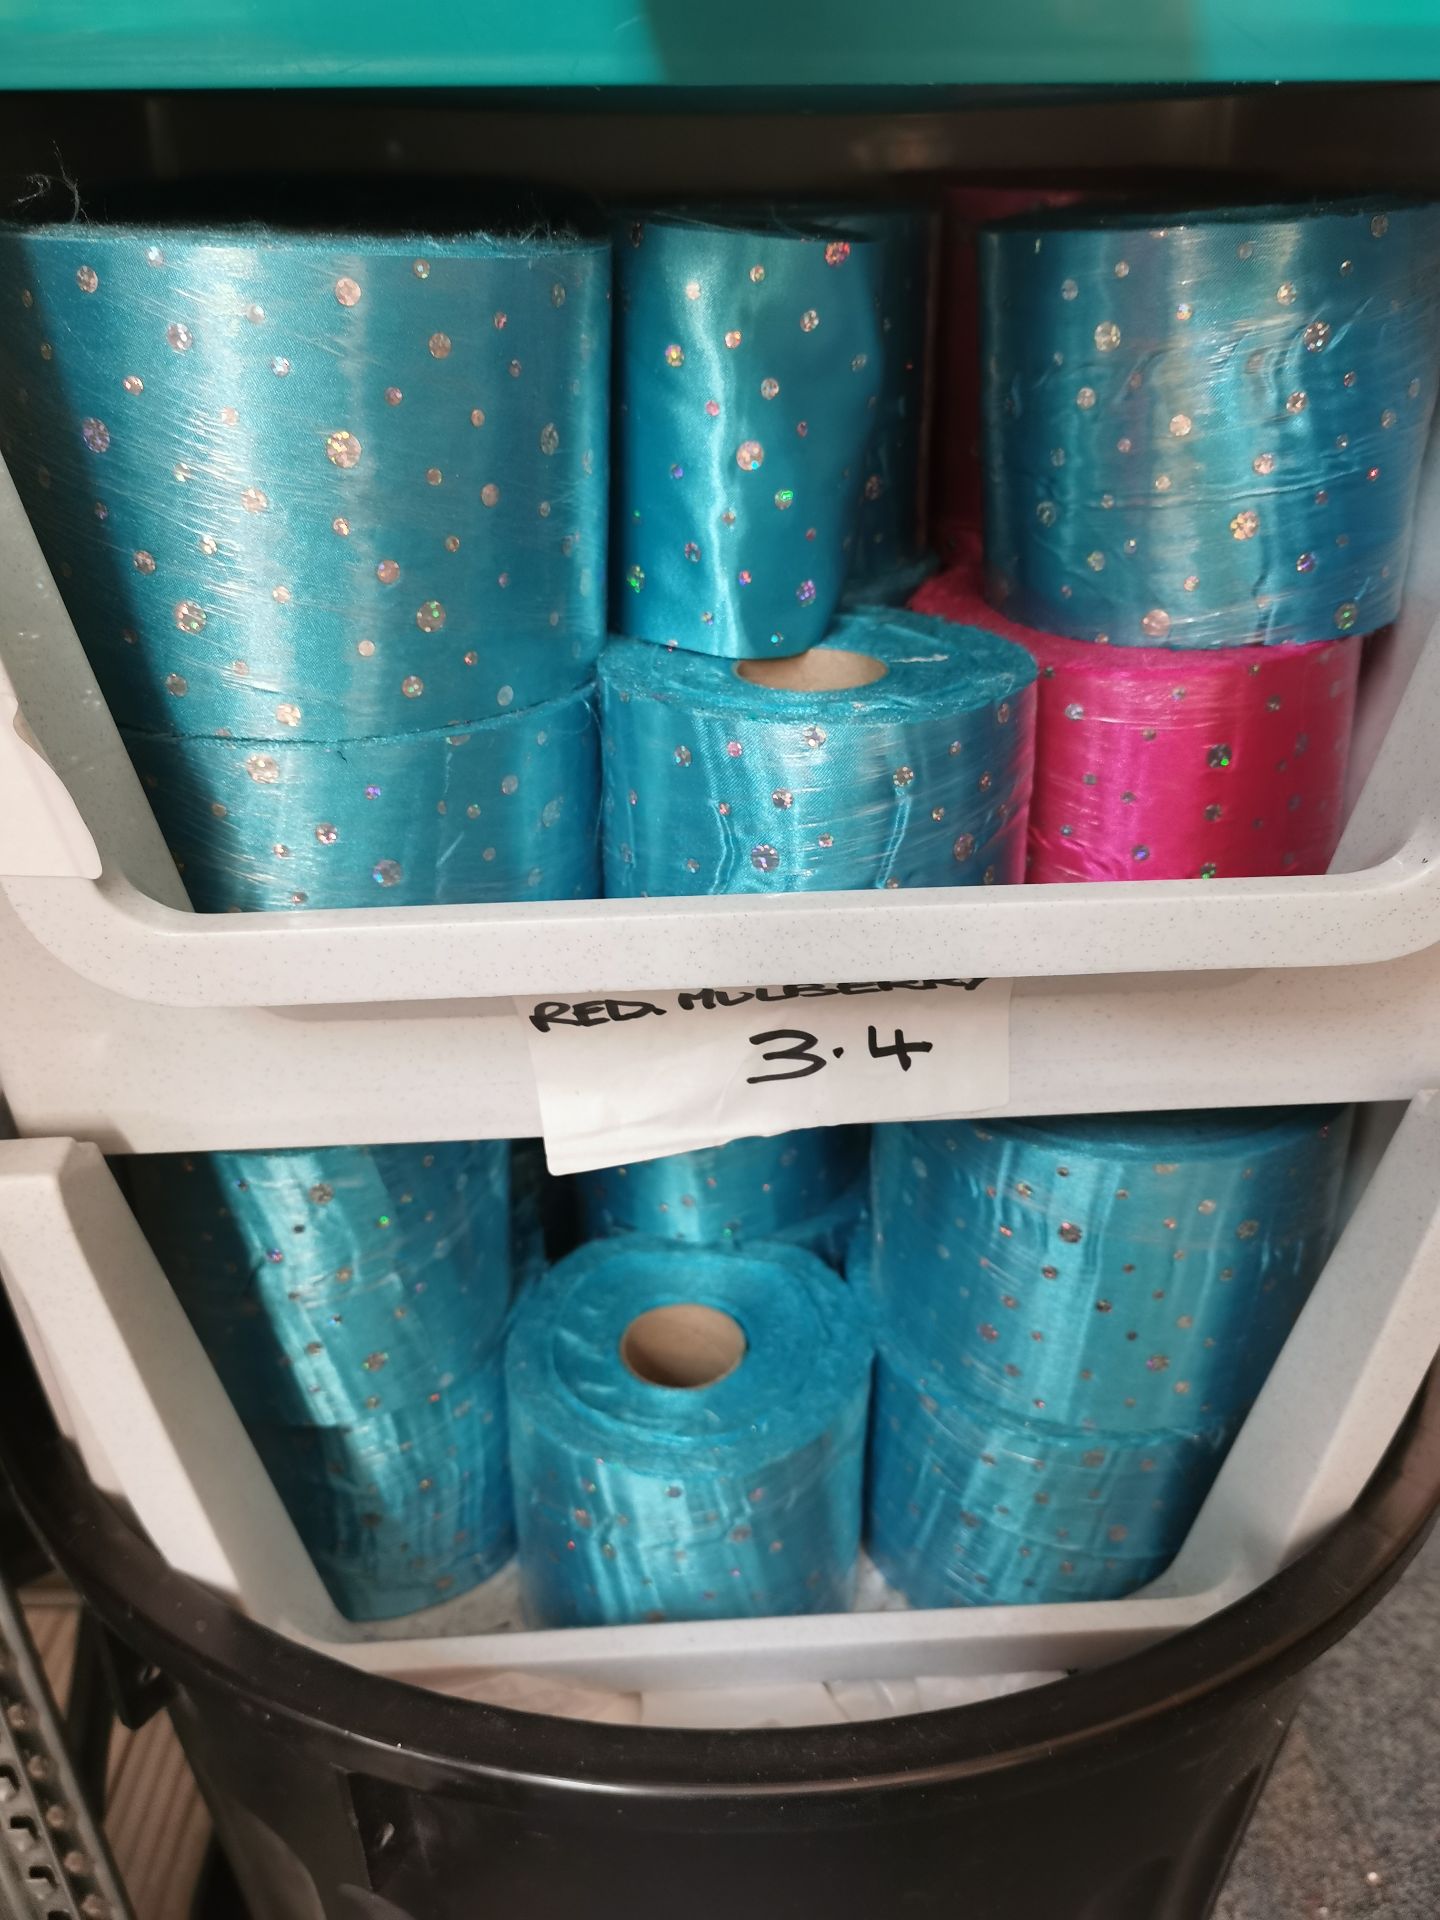 33x Sequin fabric rolls in pink and blue - Image 3 of 4